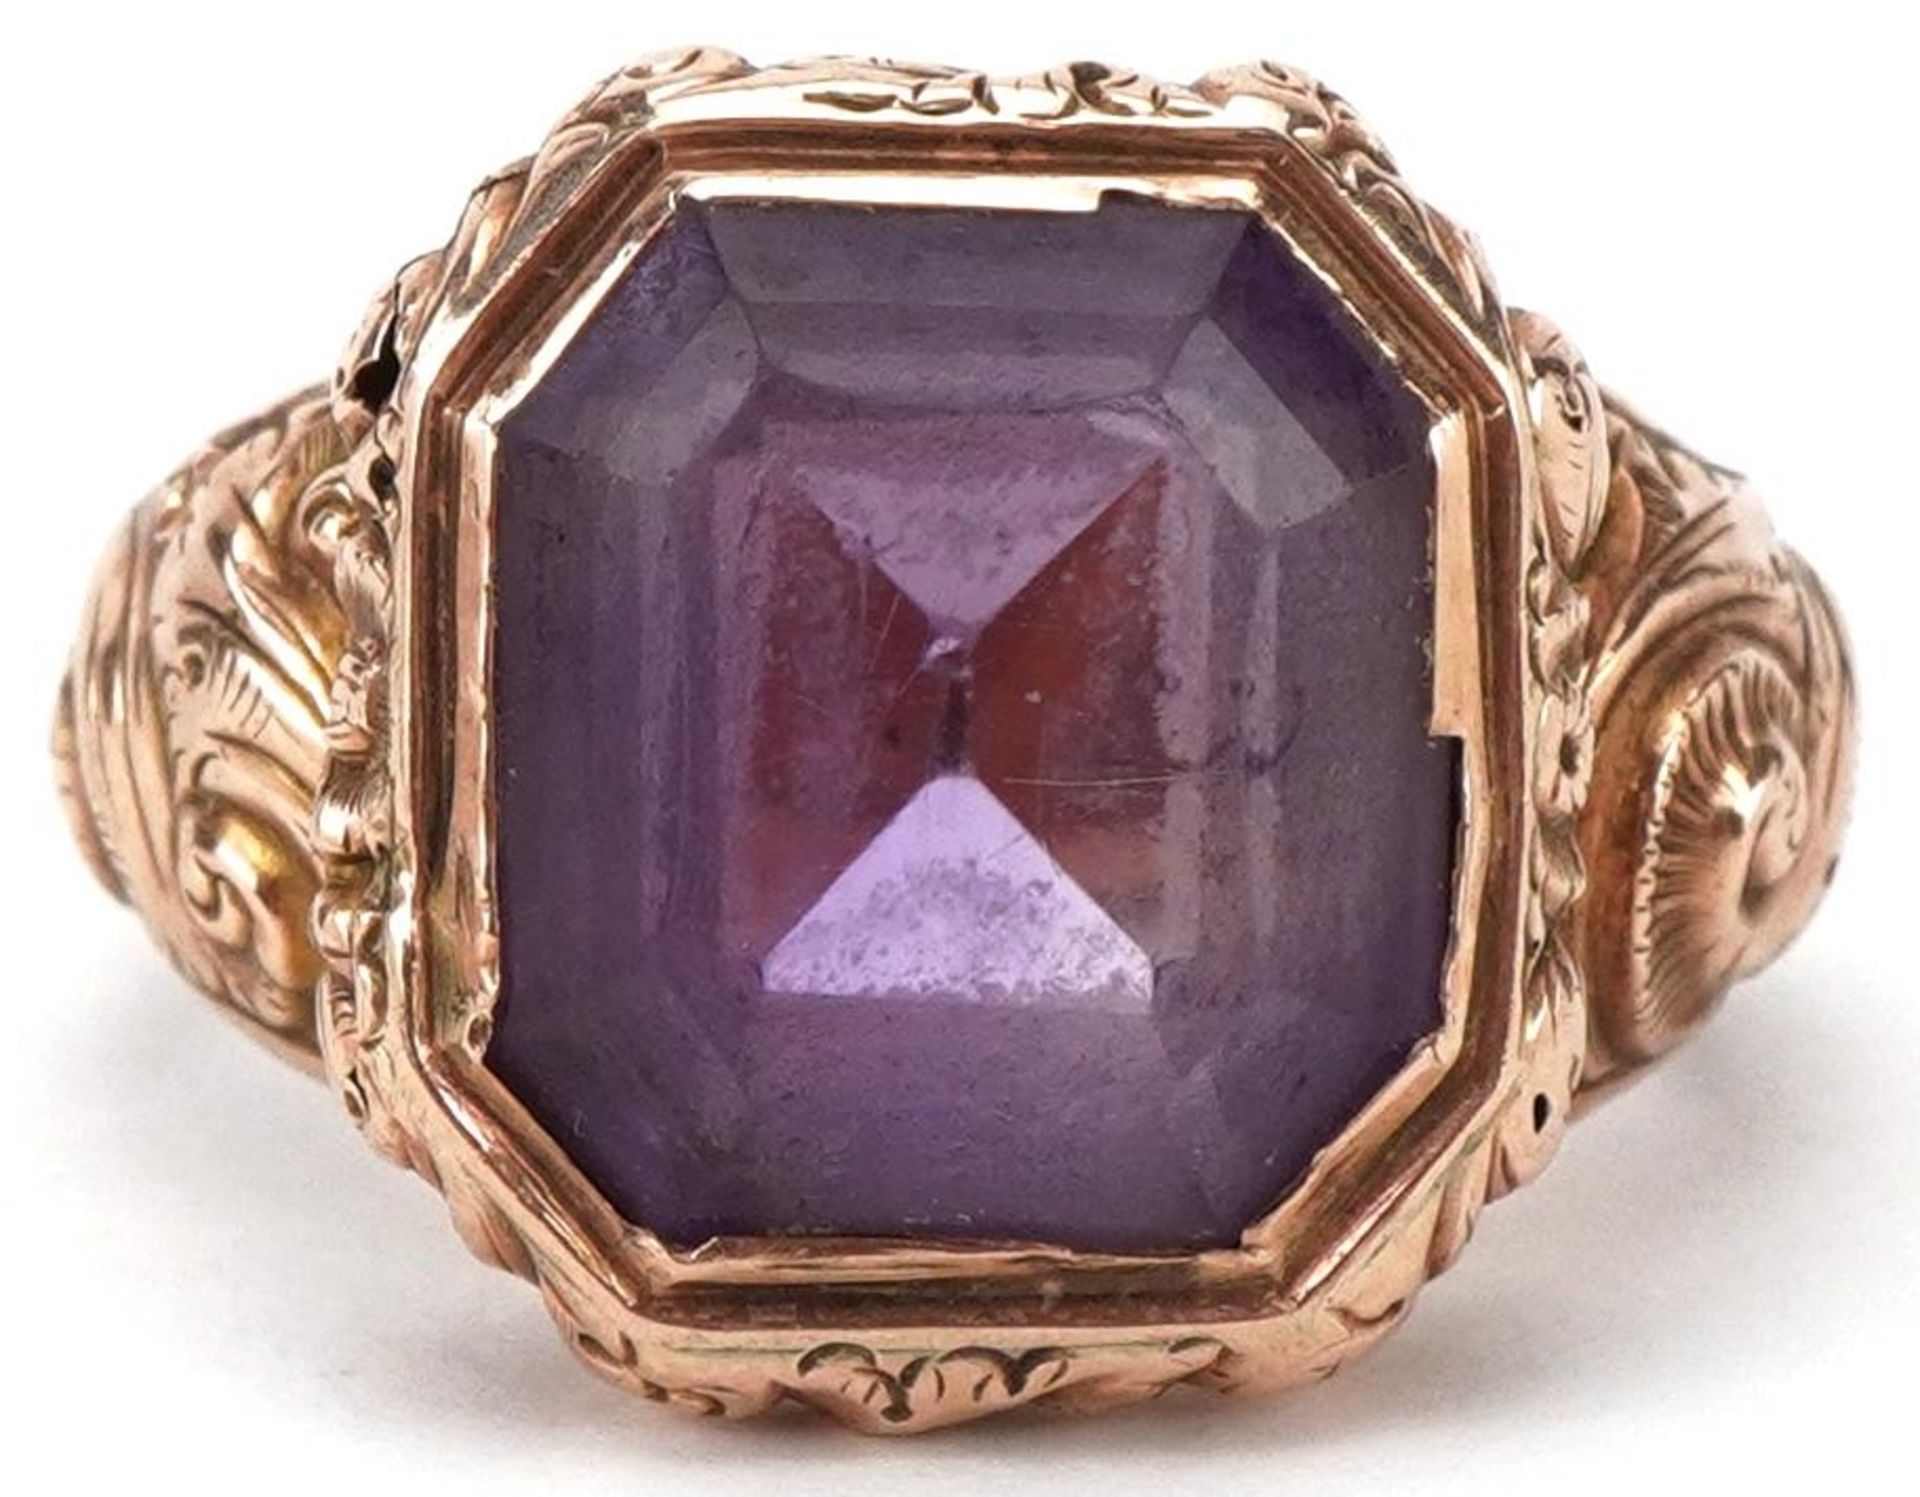 Victorian unmarked gold and yellow metal amethyst ring with ornate setting, the amethyst